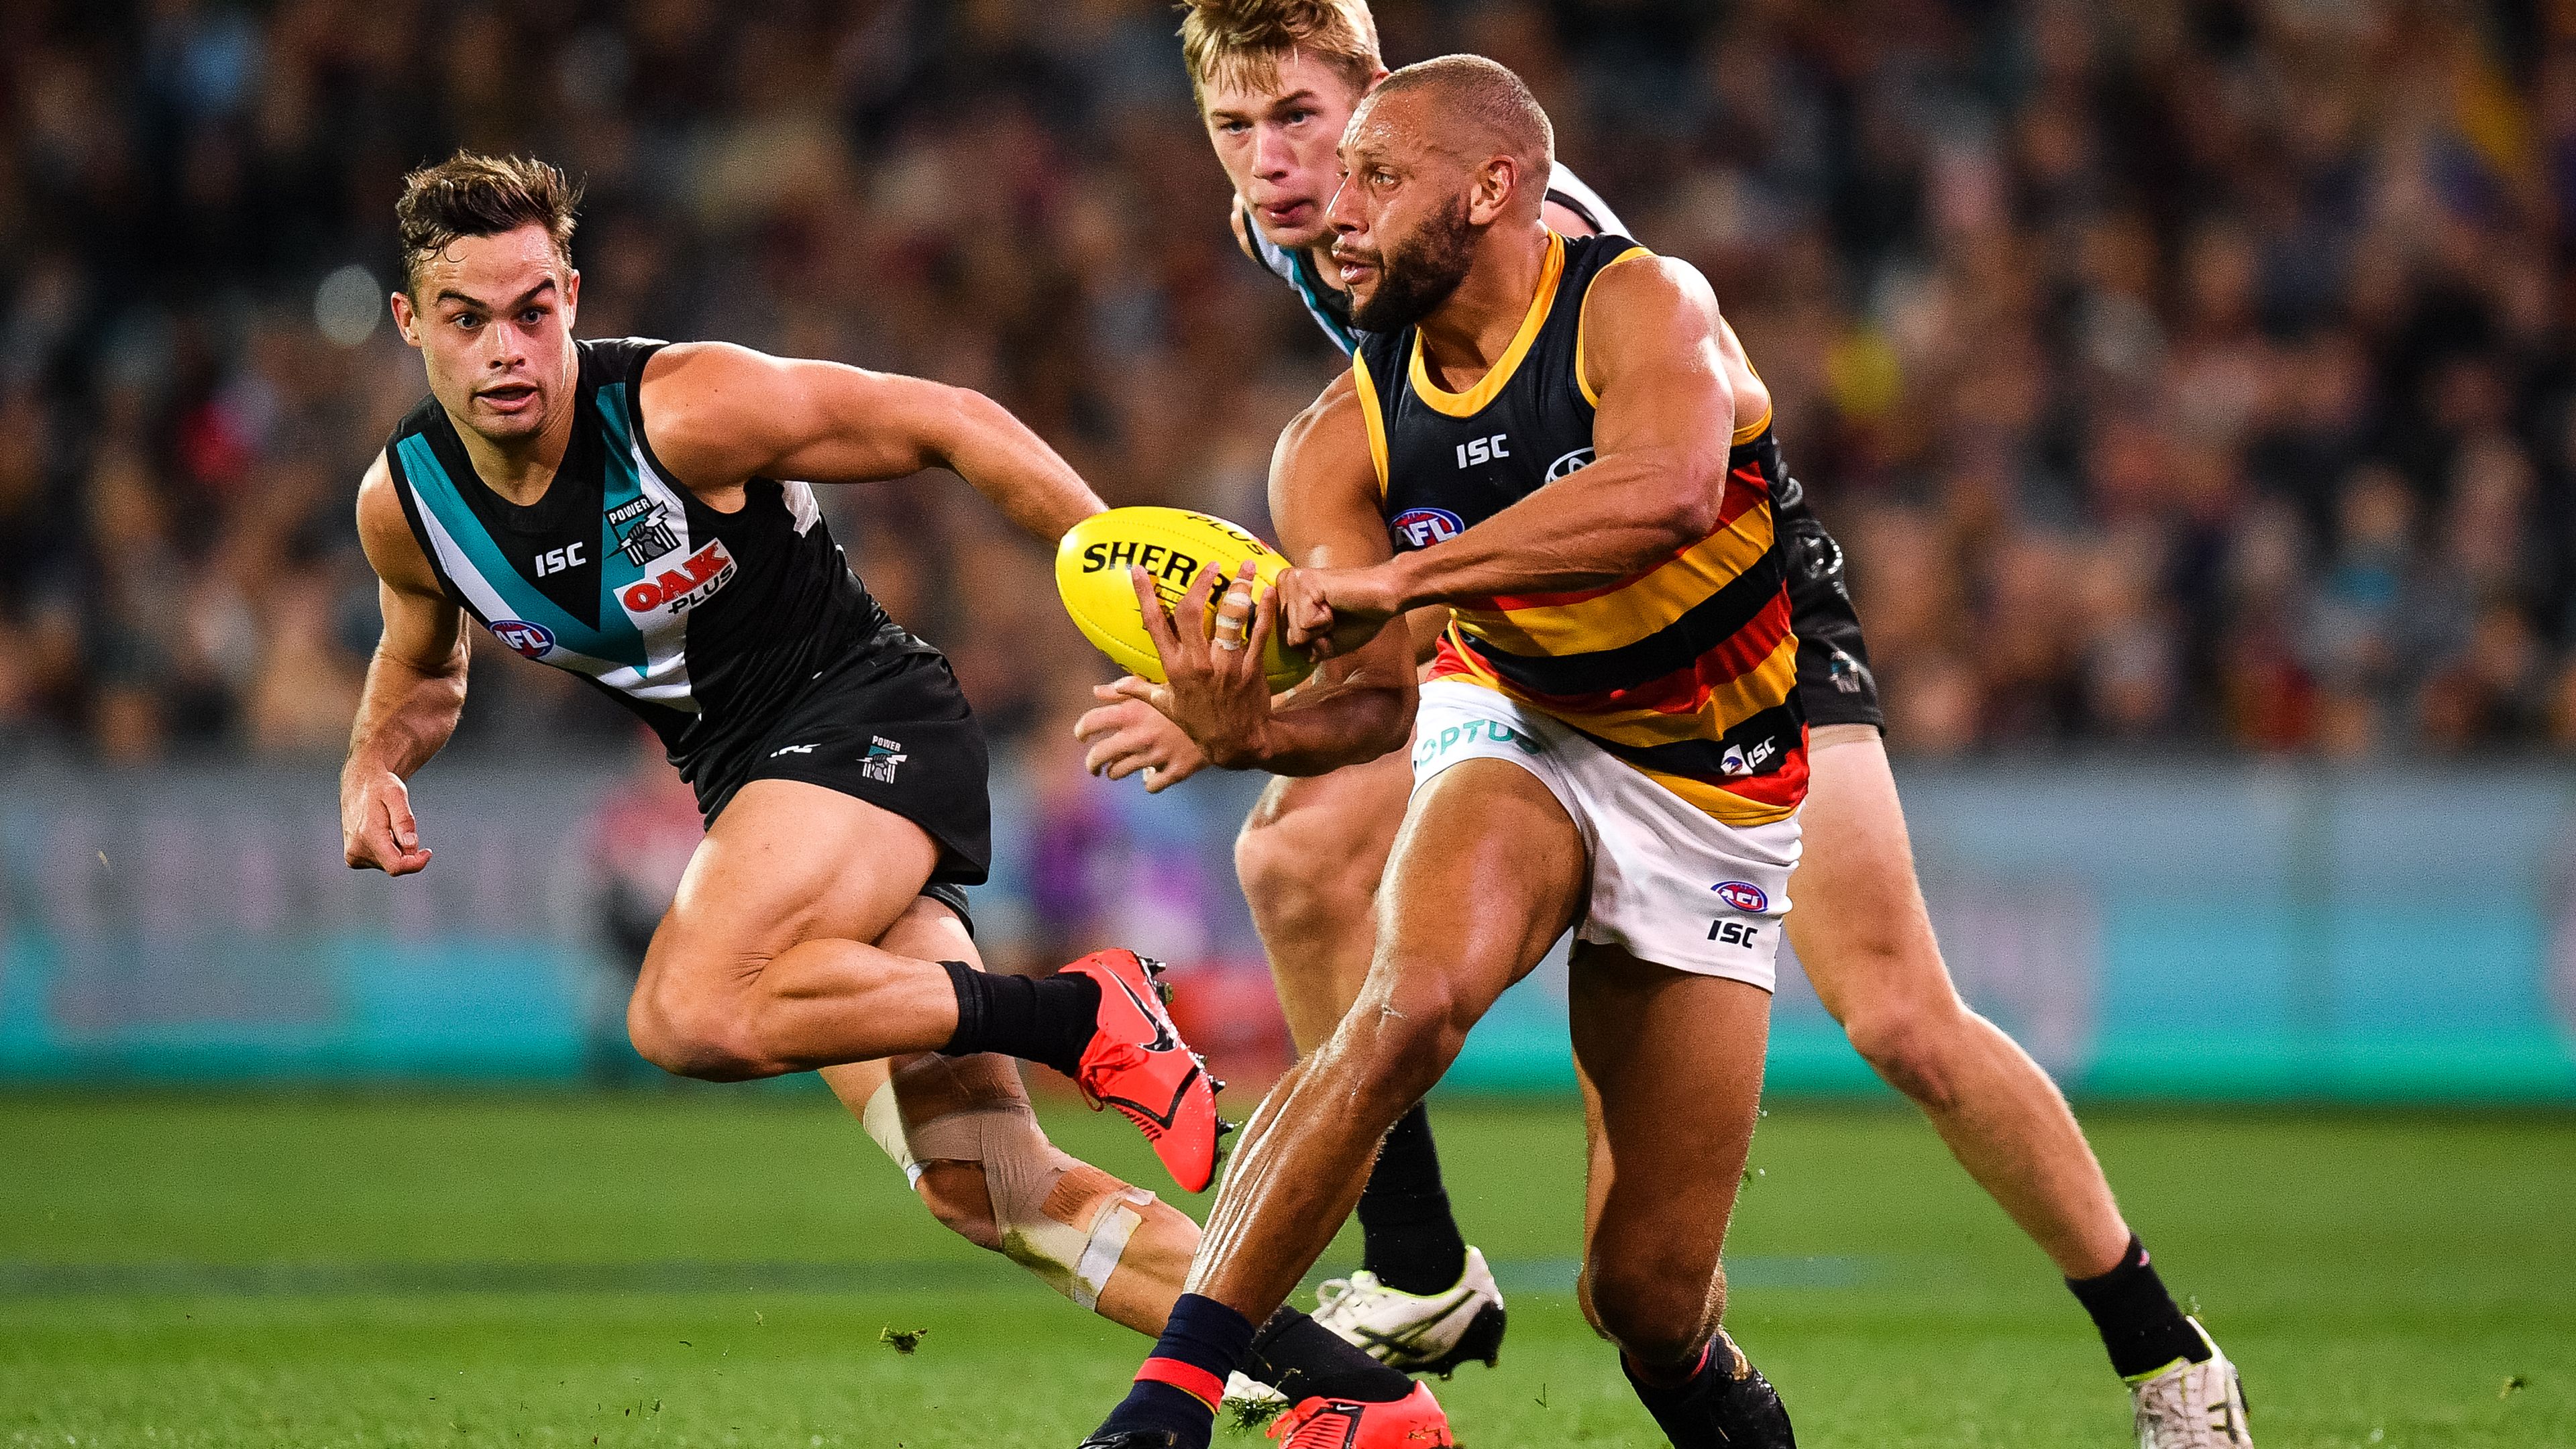 Mitch Robinson reveals 'hard moment' non vaccinated player Cam Ellis-Yolmen told him he was quitting